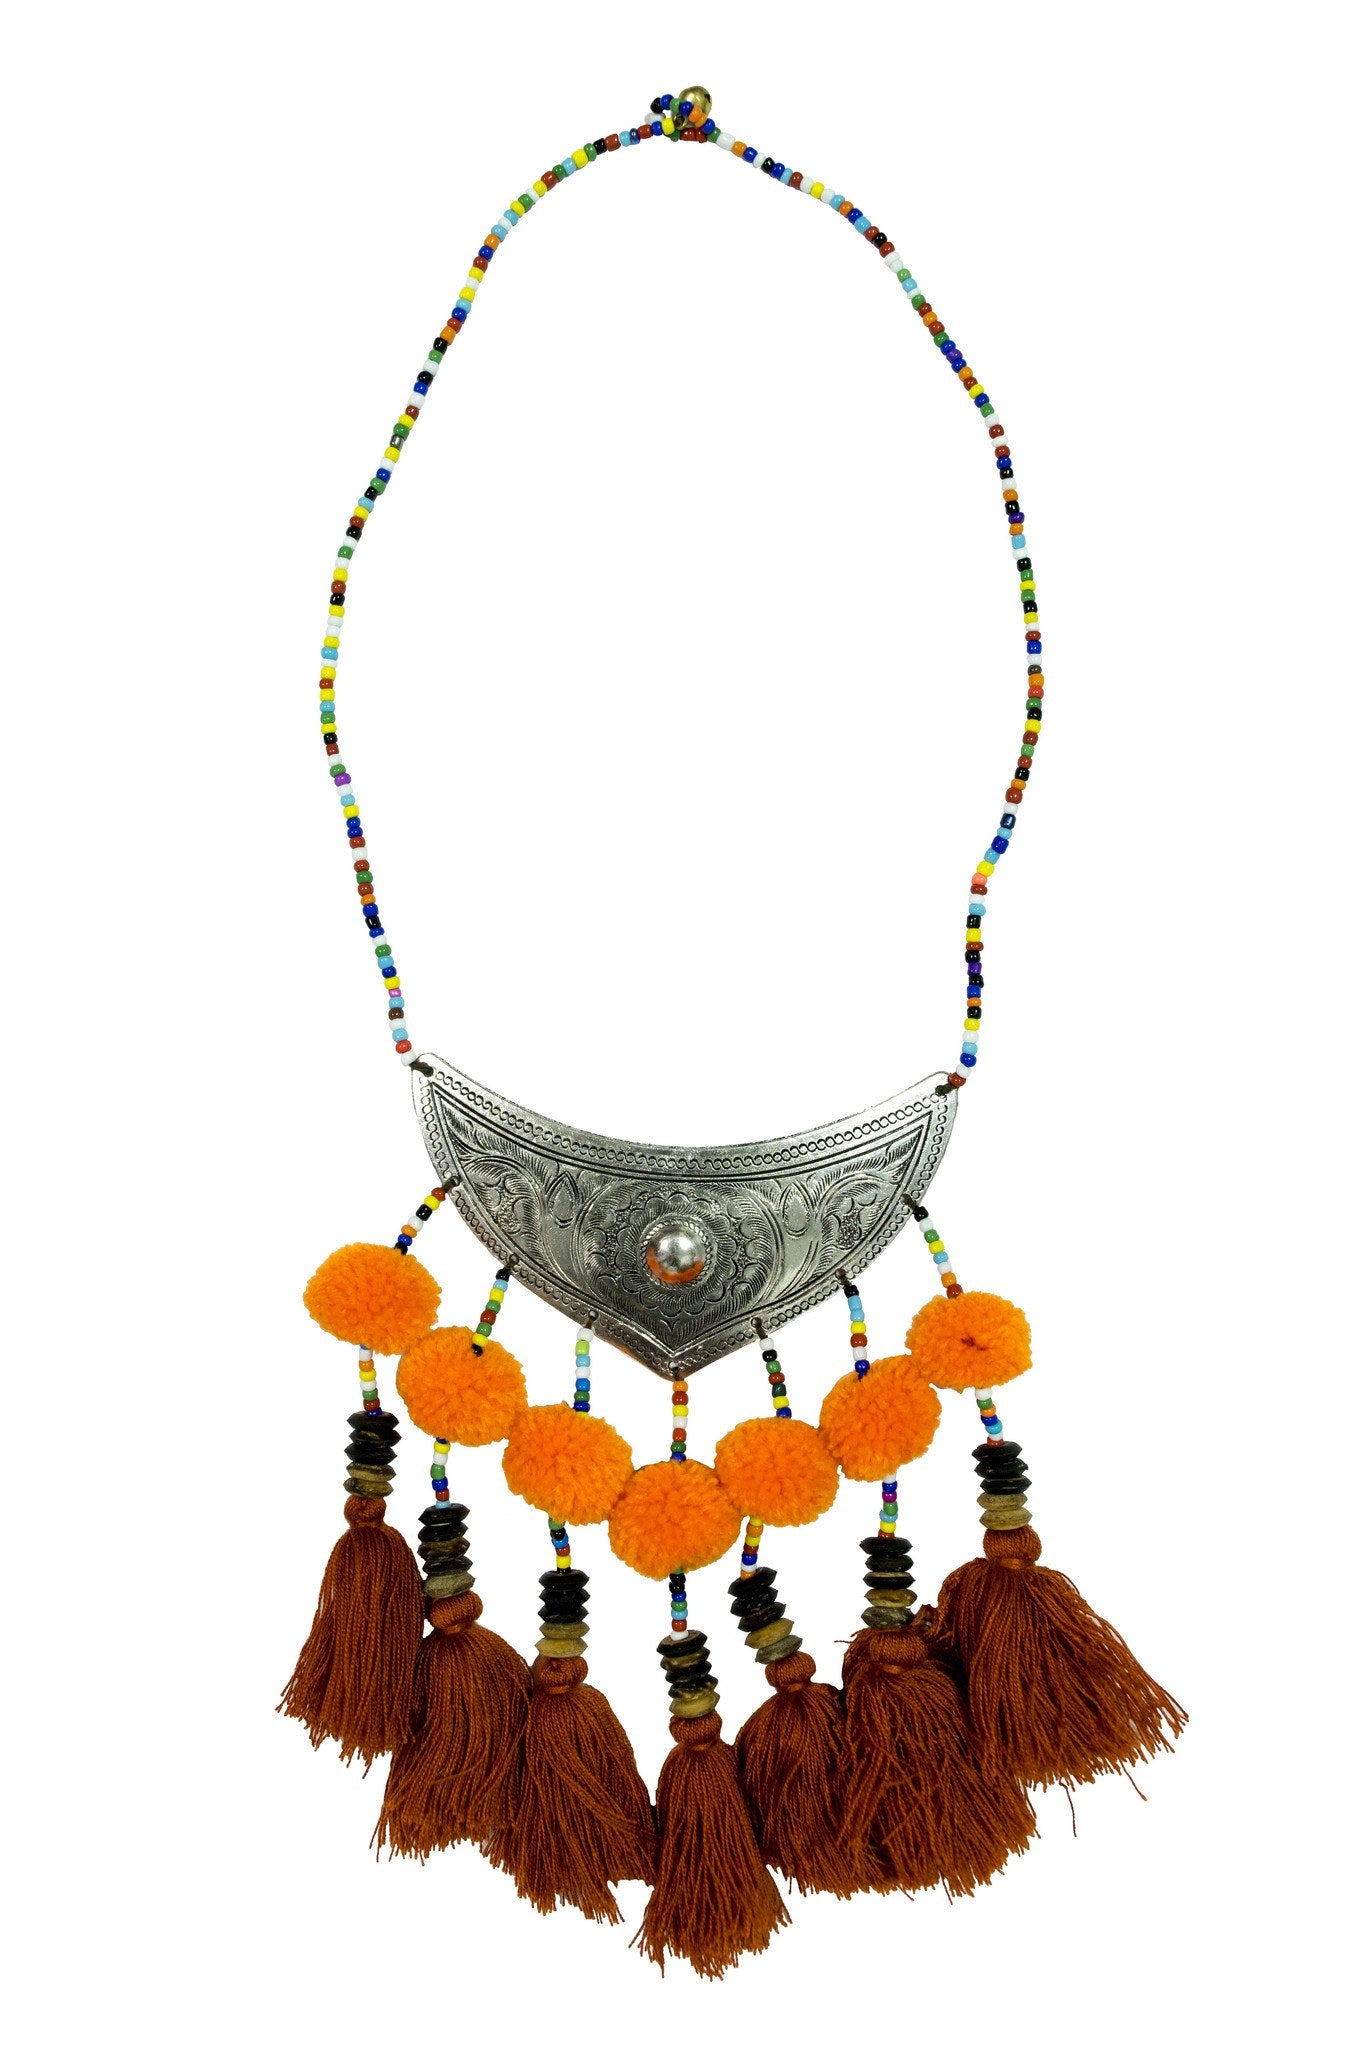 Necklace Stylish Tribal Bohemian Jewellery Unique Accessories - CCCollections